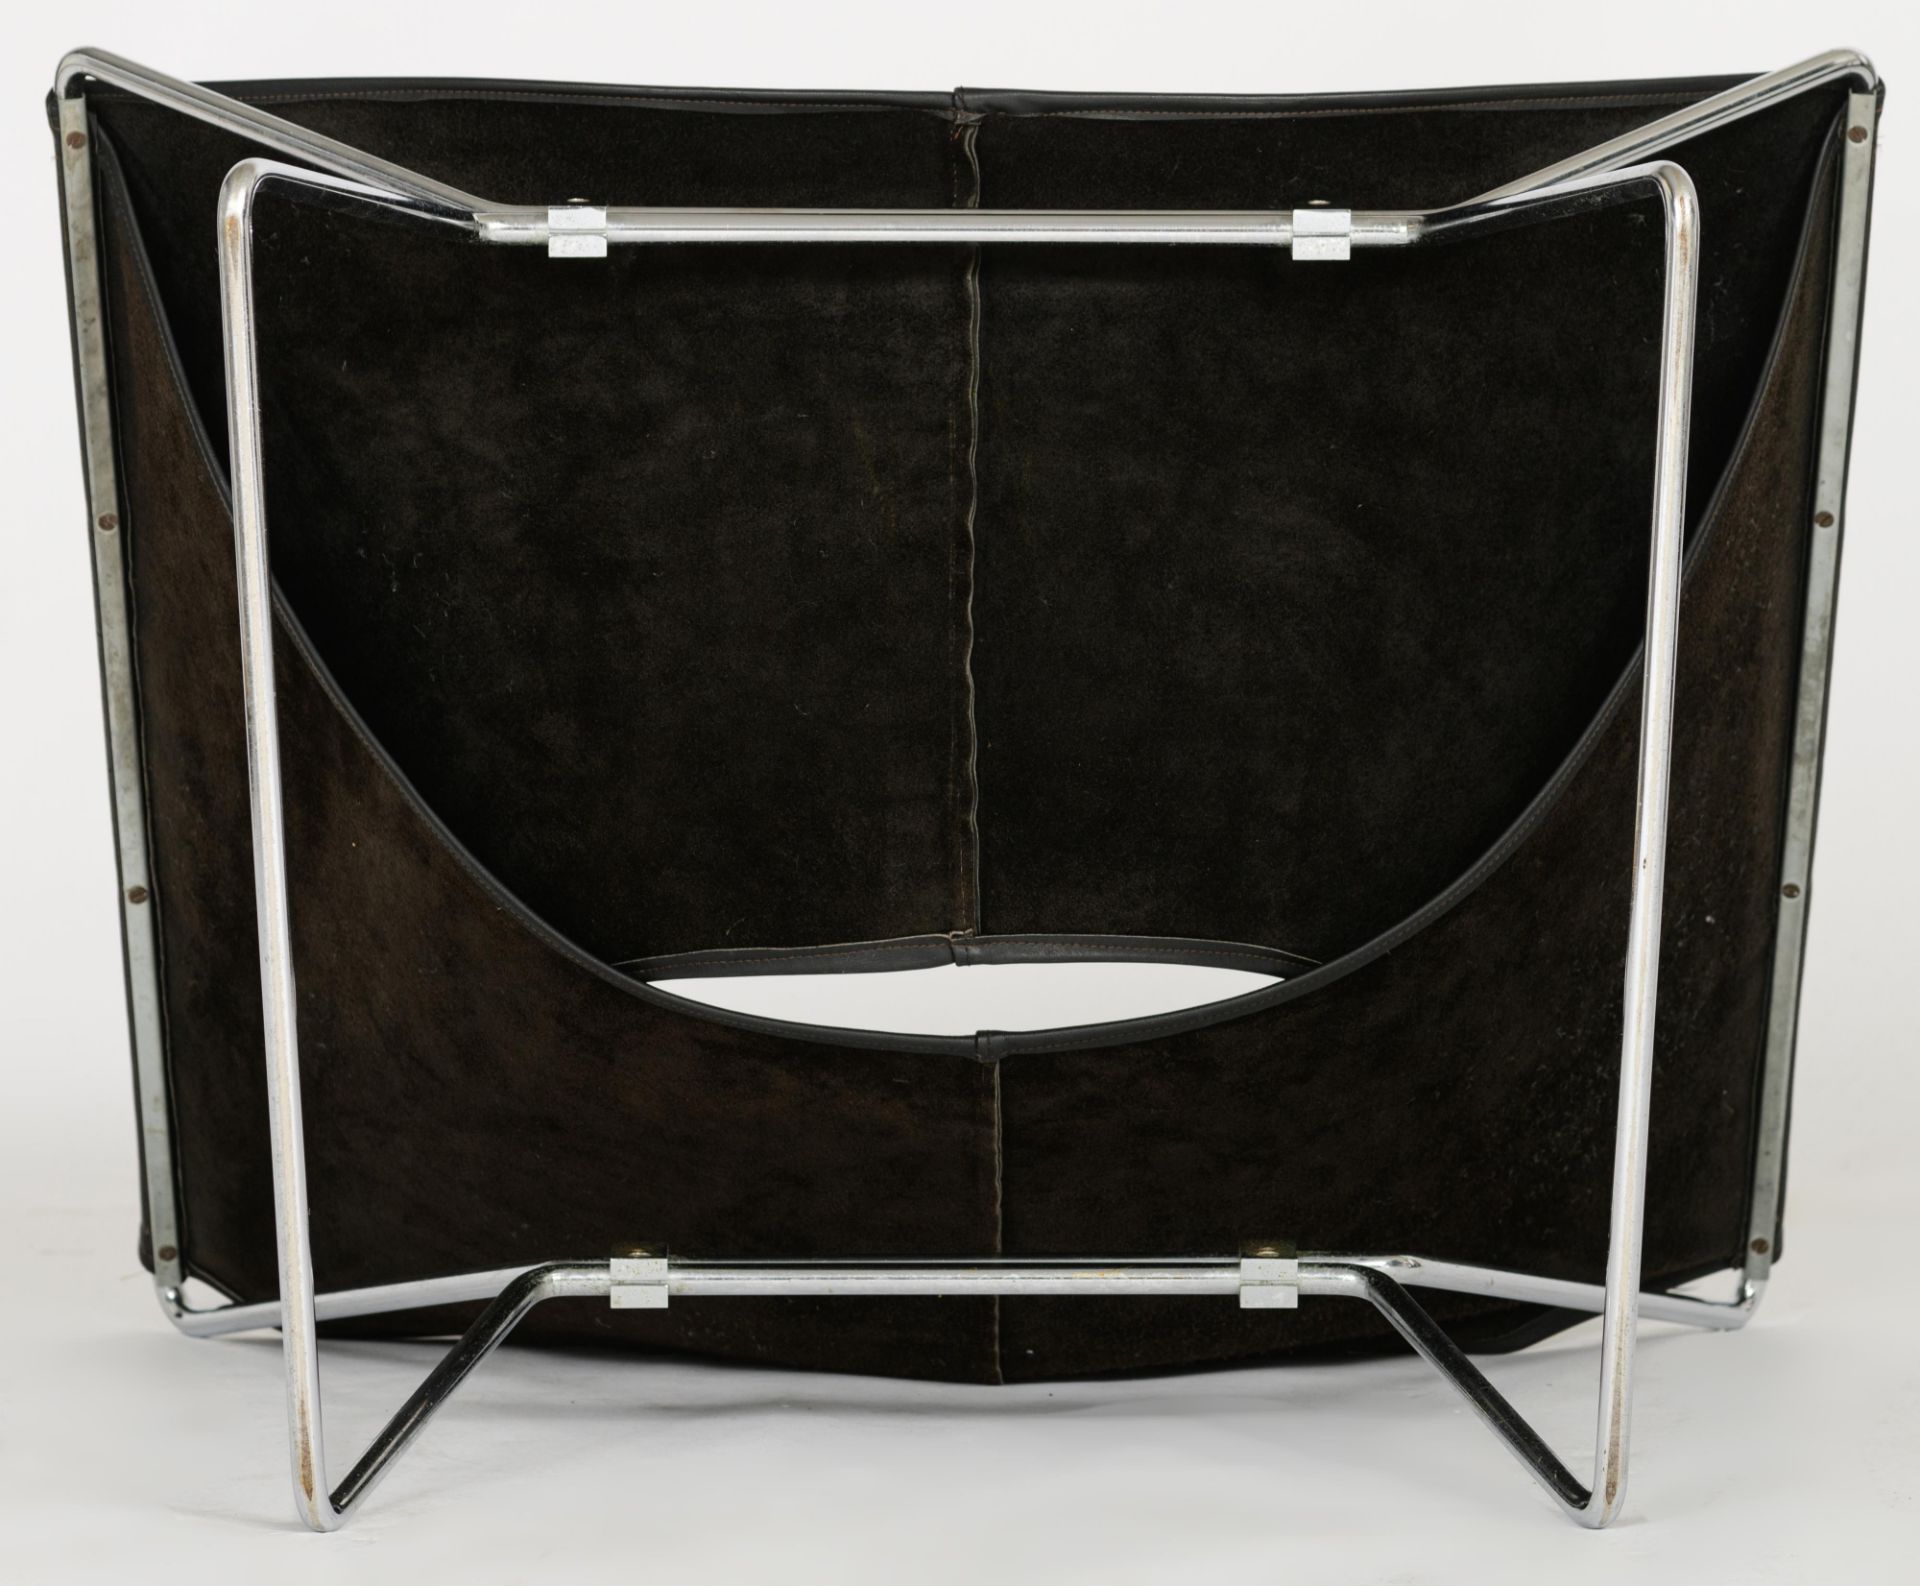 An AP-14 'butterfly' chair by Pierre Paulin for Polak, 1954, H 68,5 - W 77 - D 72 cm - Image 6 of 7